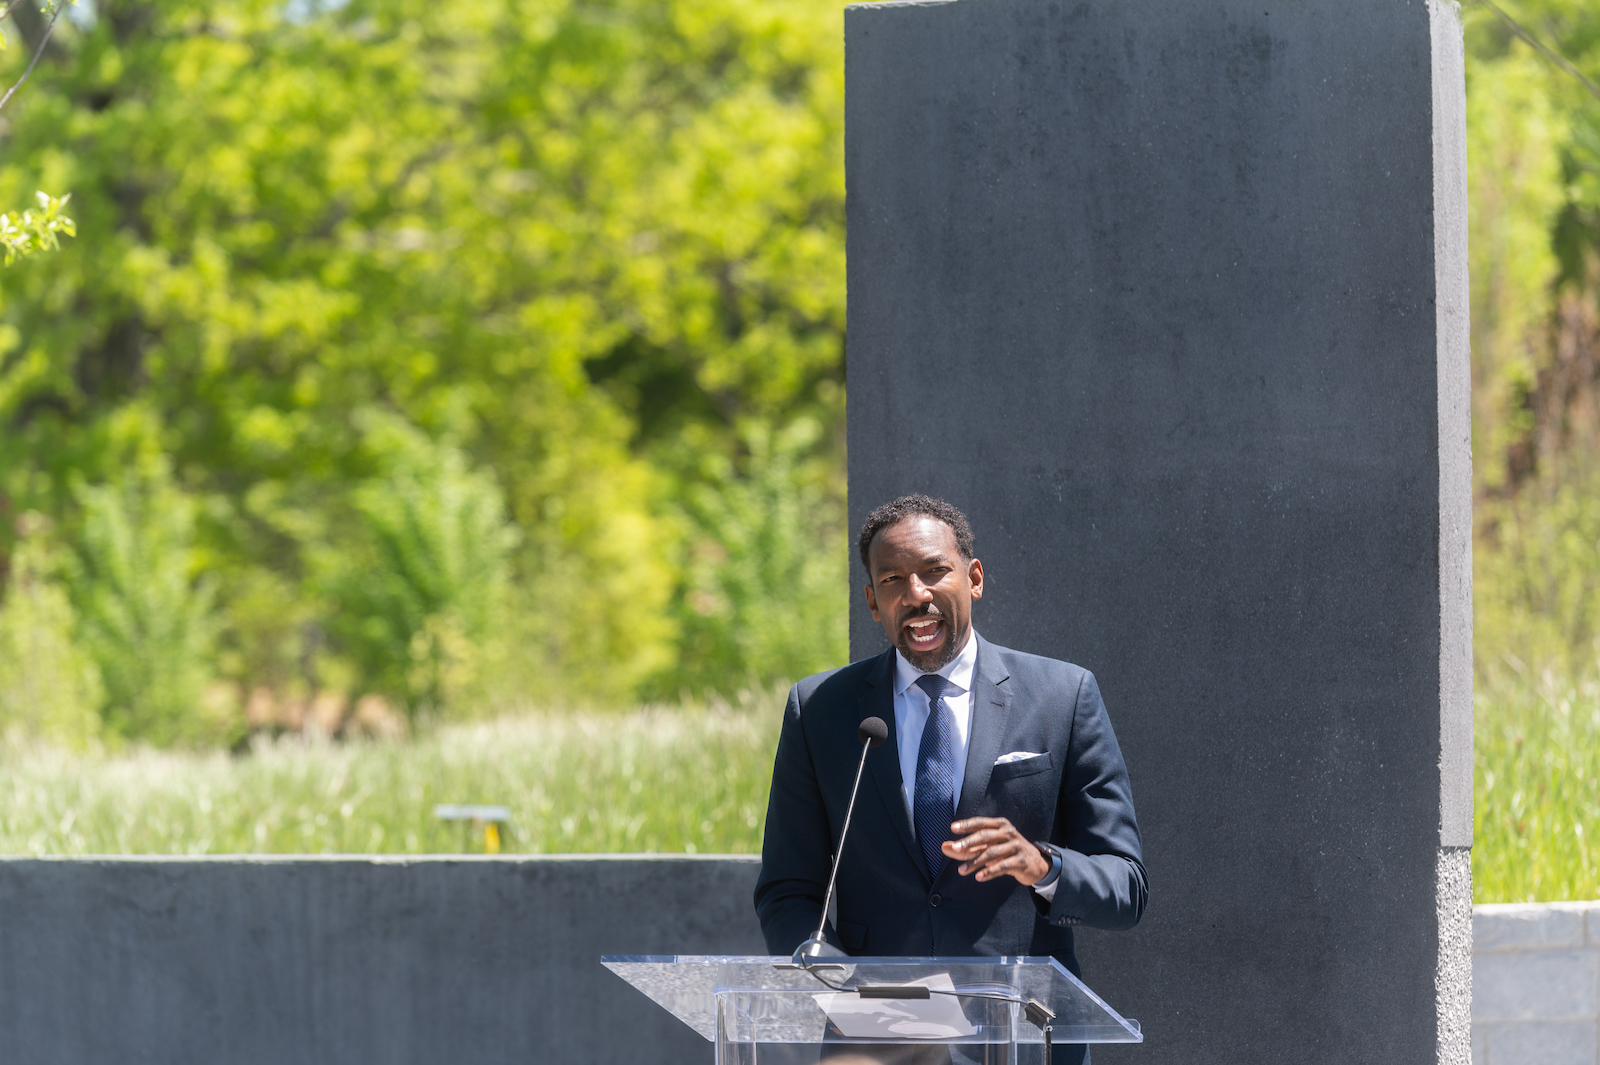 Andre Dickens, Atlanta city council member who also serves on the Georgia Tech Alumni Association board of trustees, speaks about the historical significance of events that took place at the EcoCommons site at an event in April 2021. Photo by Allison Carter.